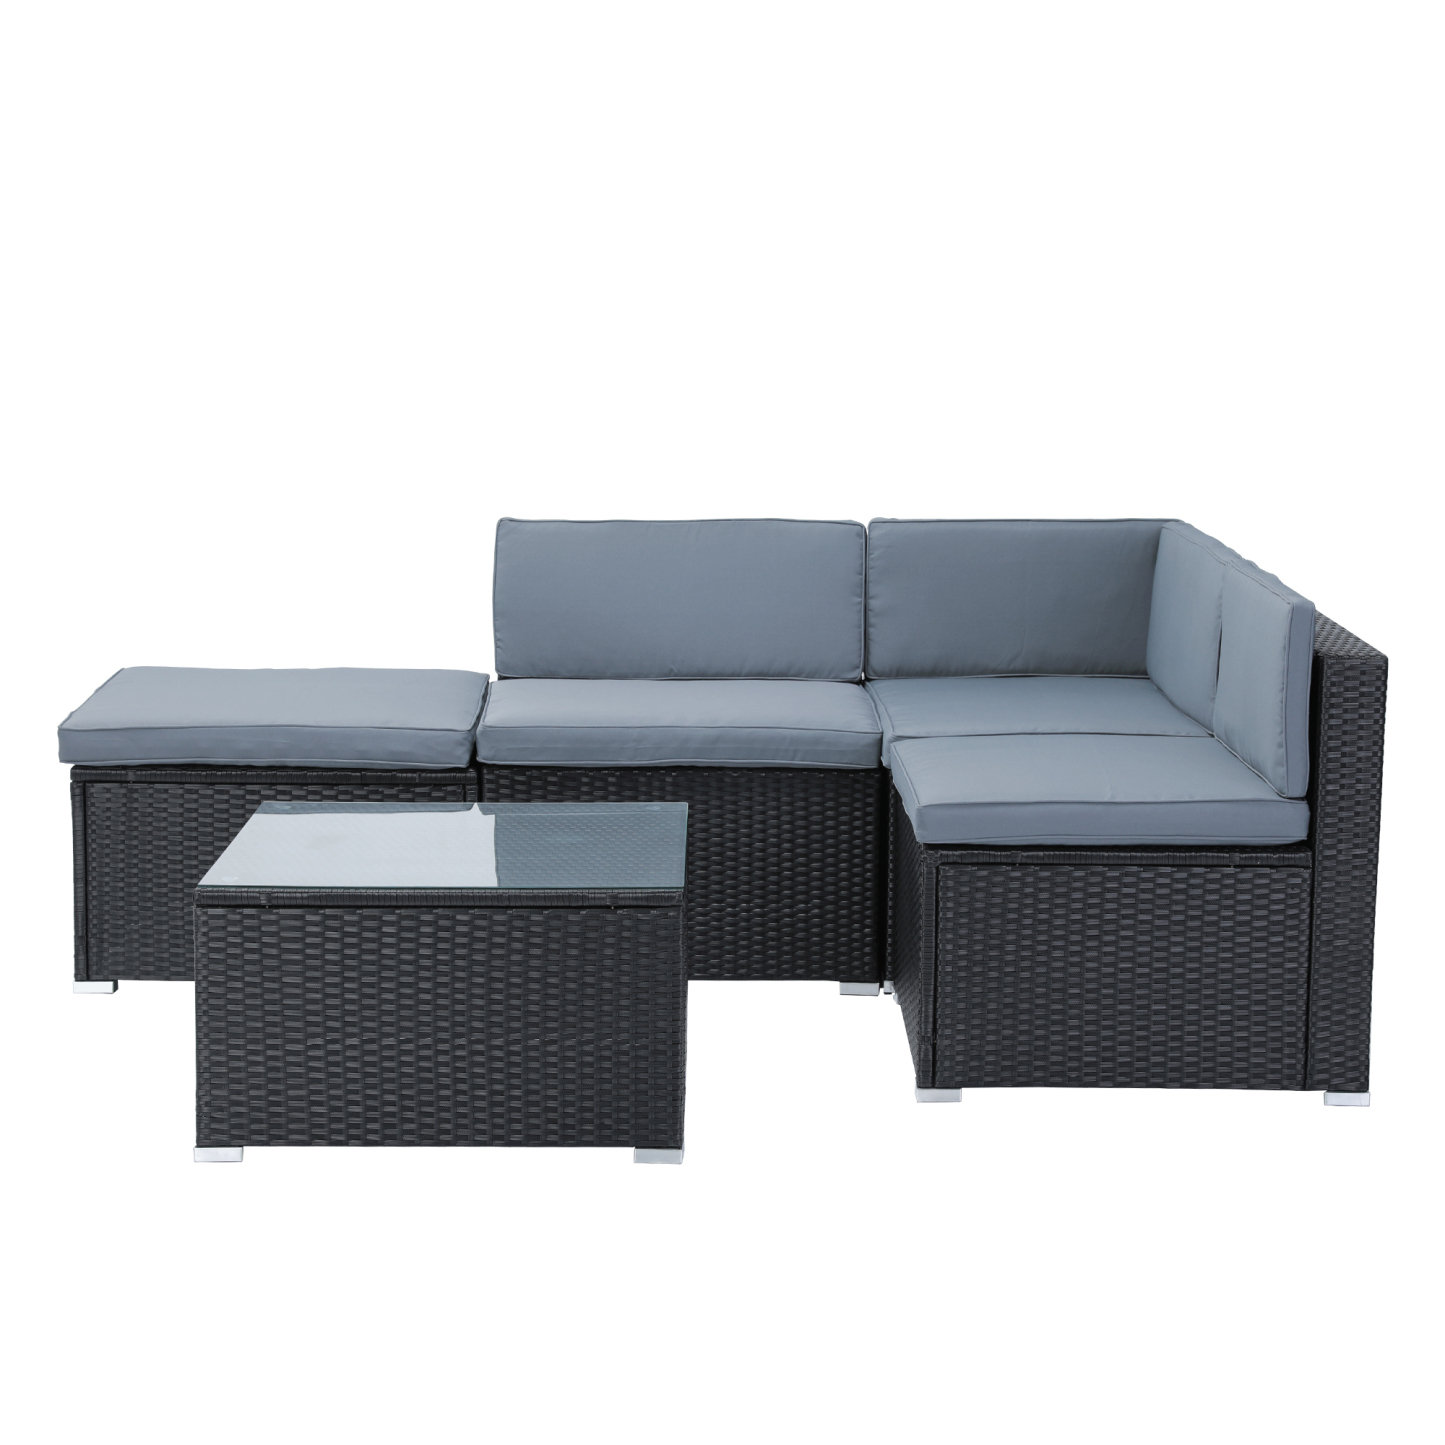 Mondawe 6-piece All-Weather Wicker PE rattan Patio Outdoor Lounge Conversation Sectional Set with coffee table, wicker sofas, ottomans, removable cushions